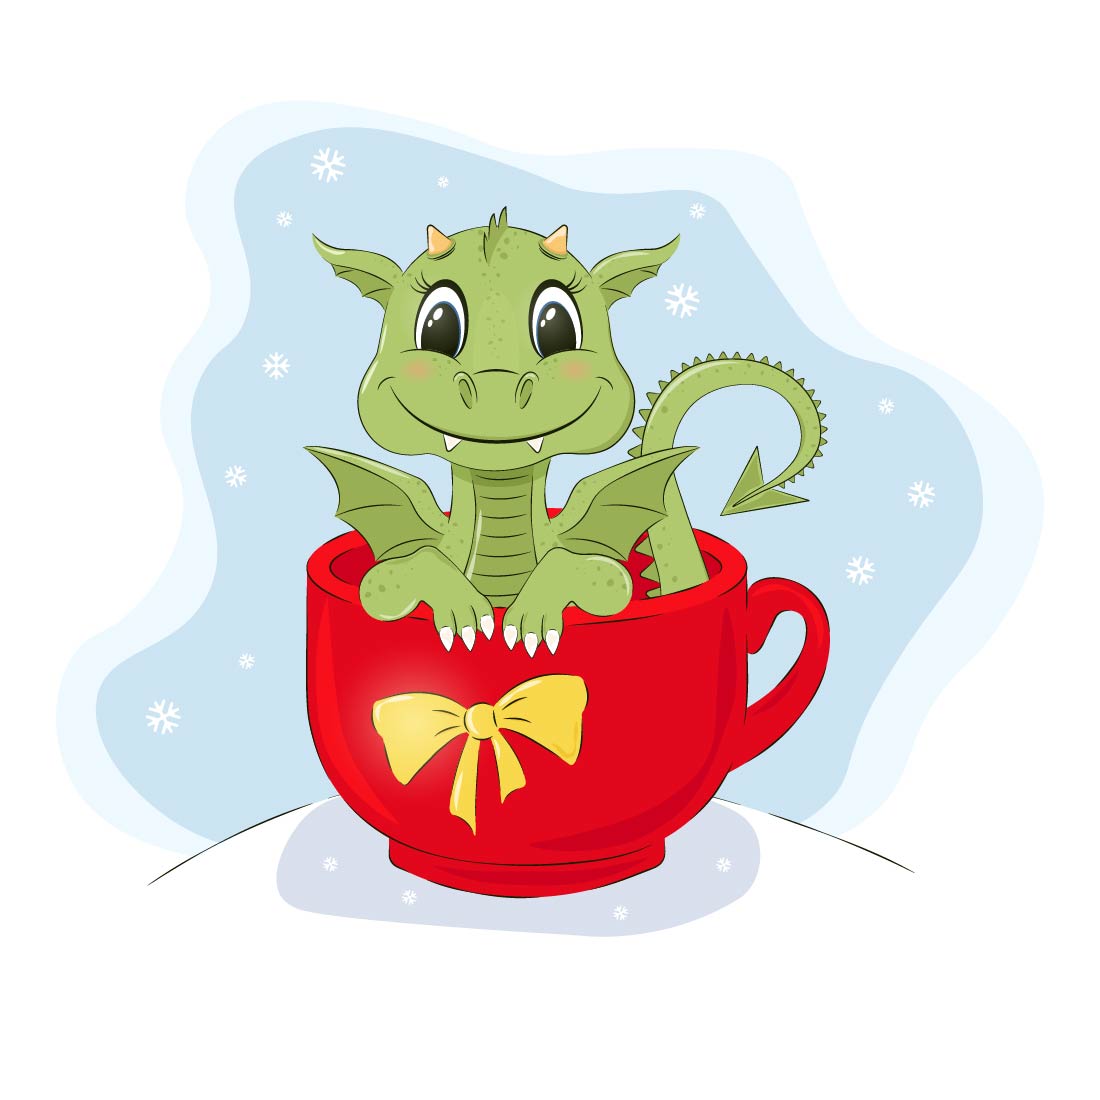 6 Christmas illustrations with a cute cartoon dragon preview image.